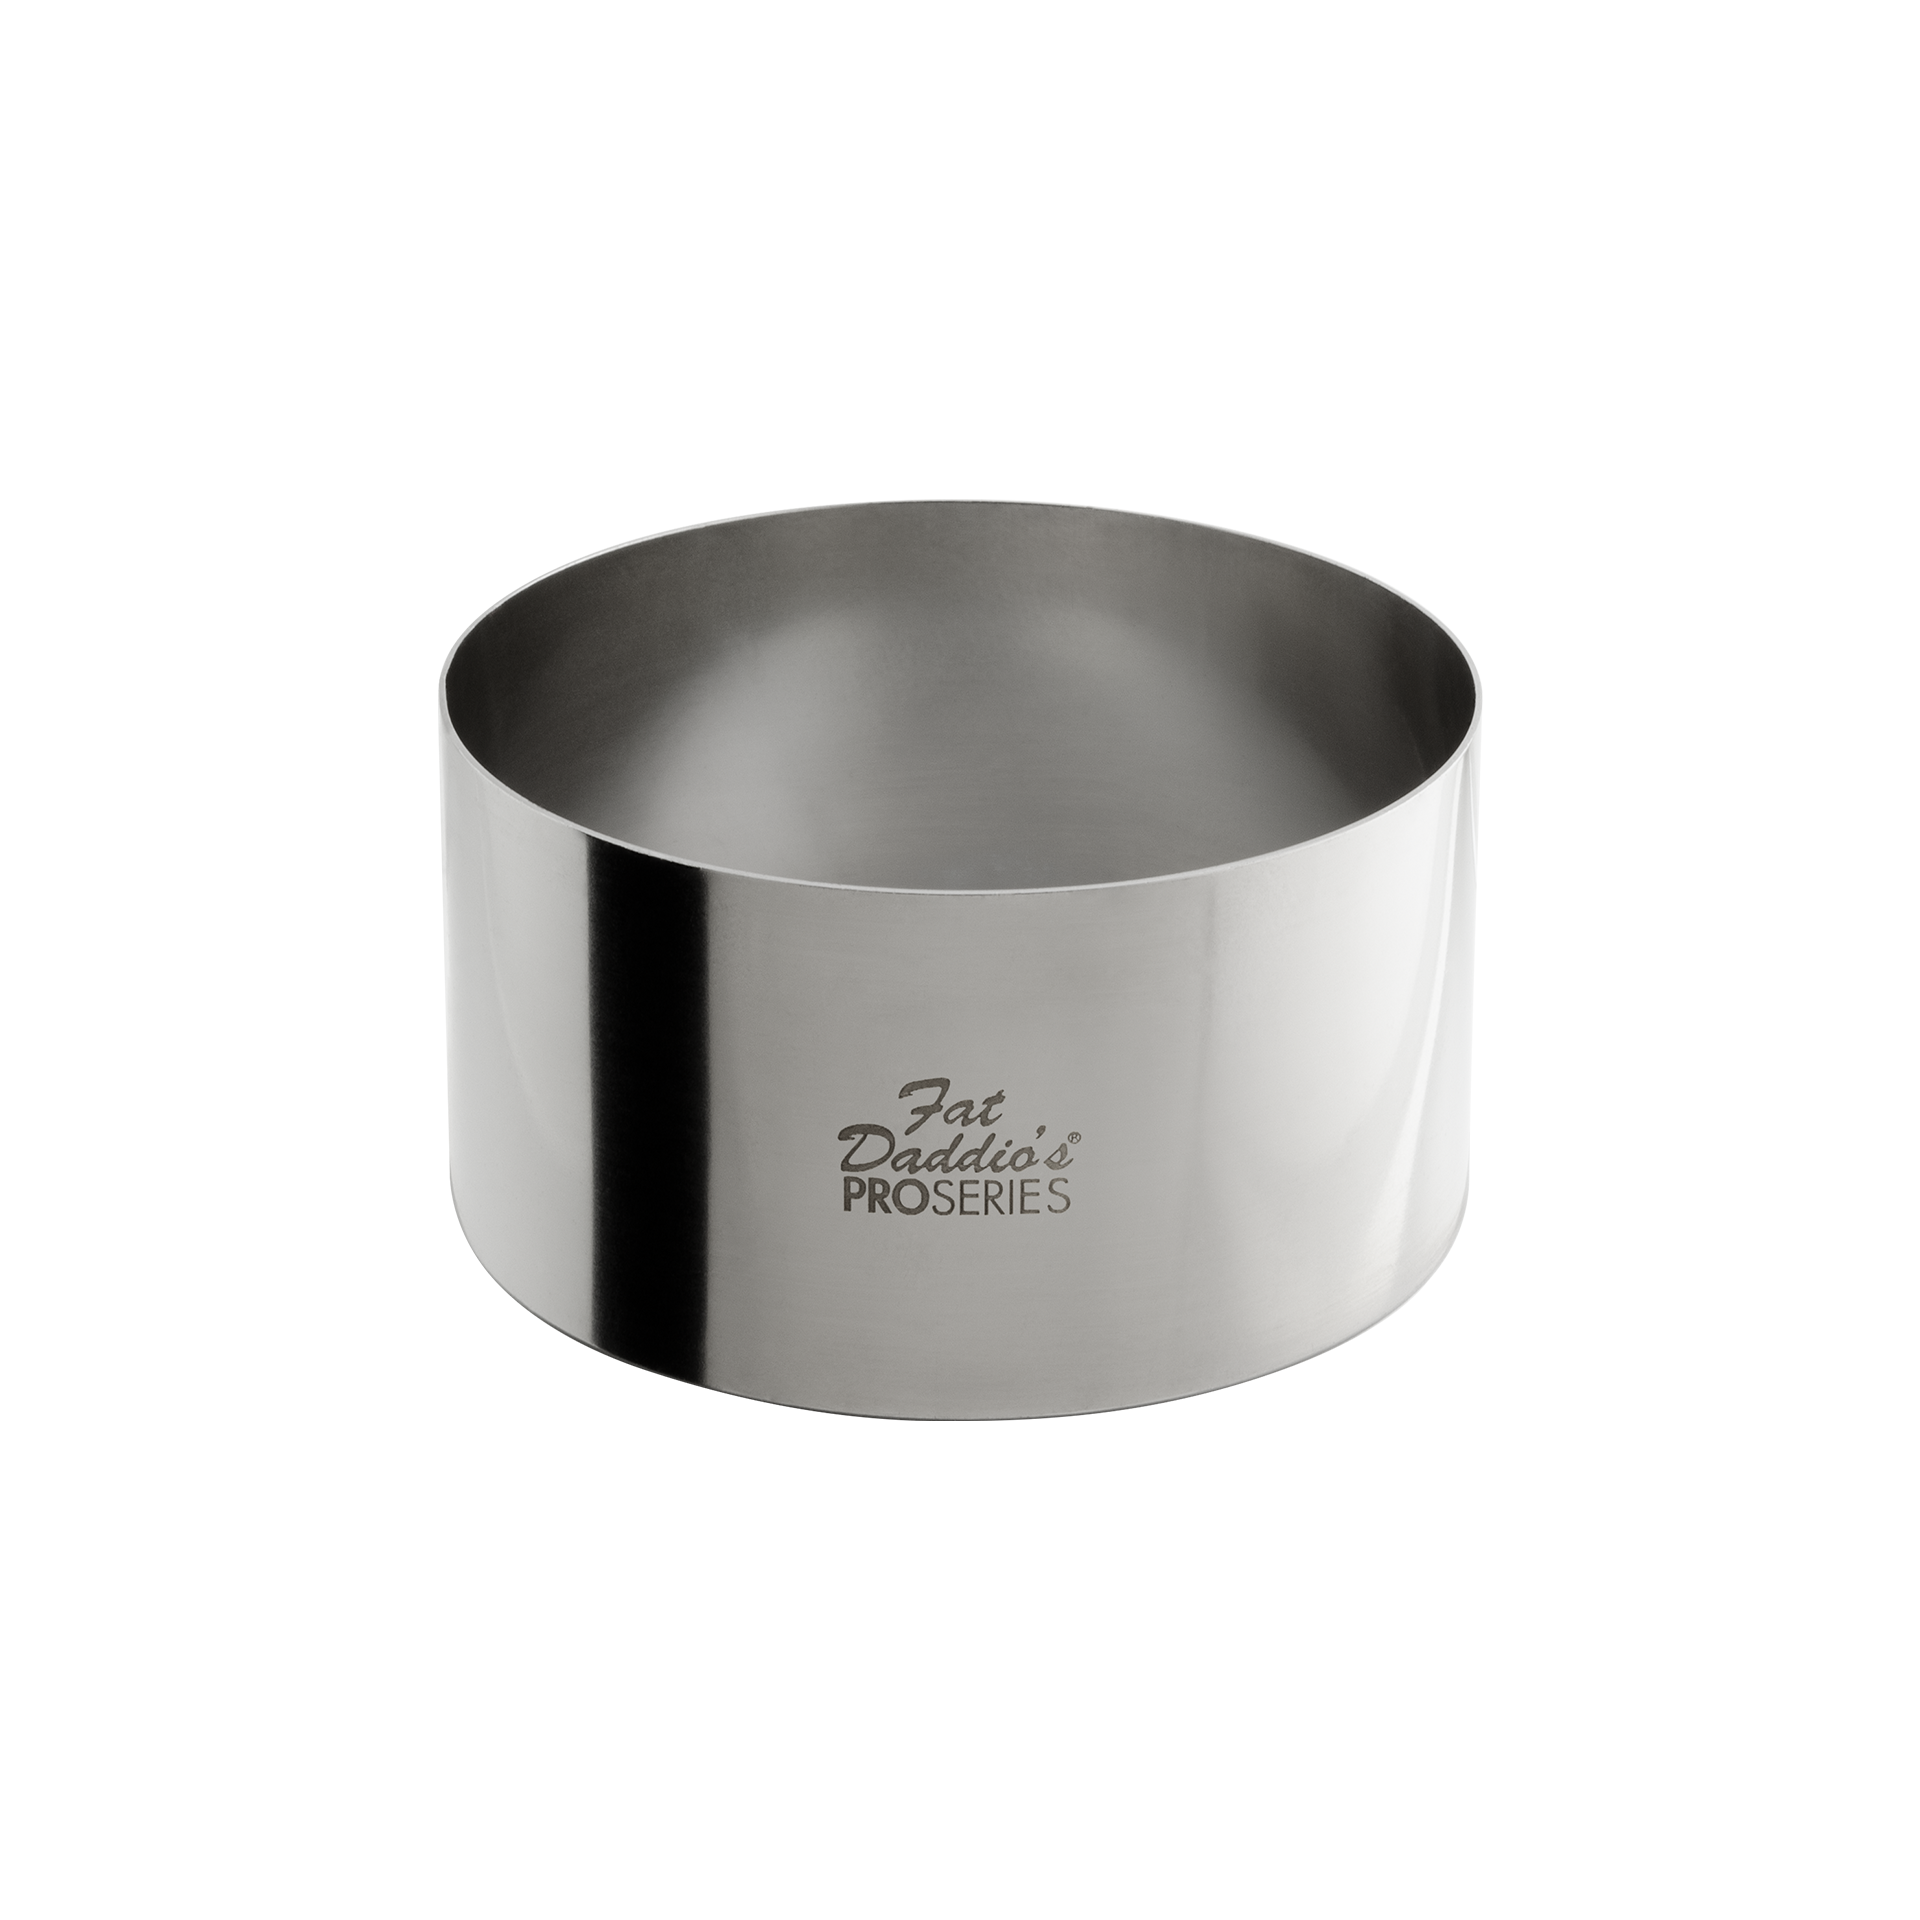 Fat Daddios Stainless Steel Round Cake and Pastry Ring 2.5 inch x 2 inch 